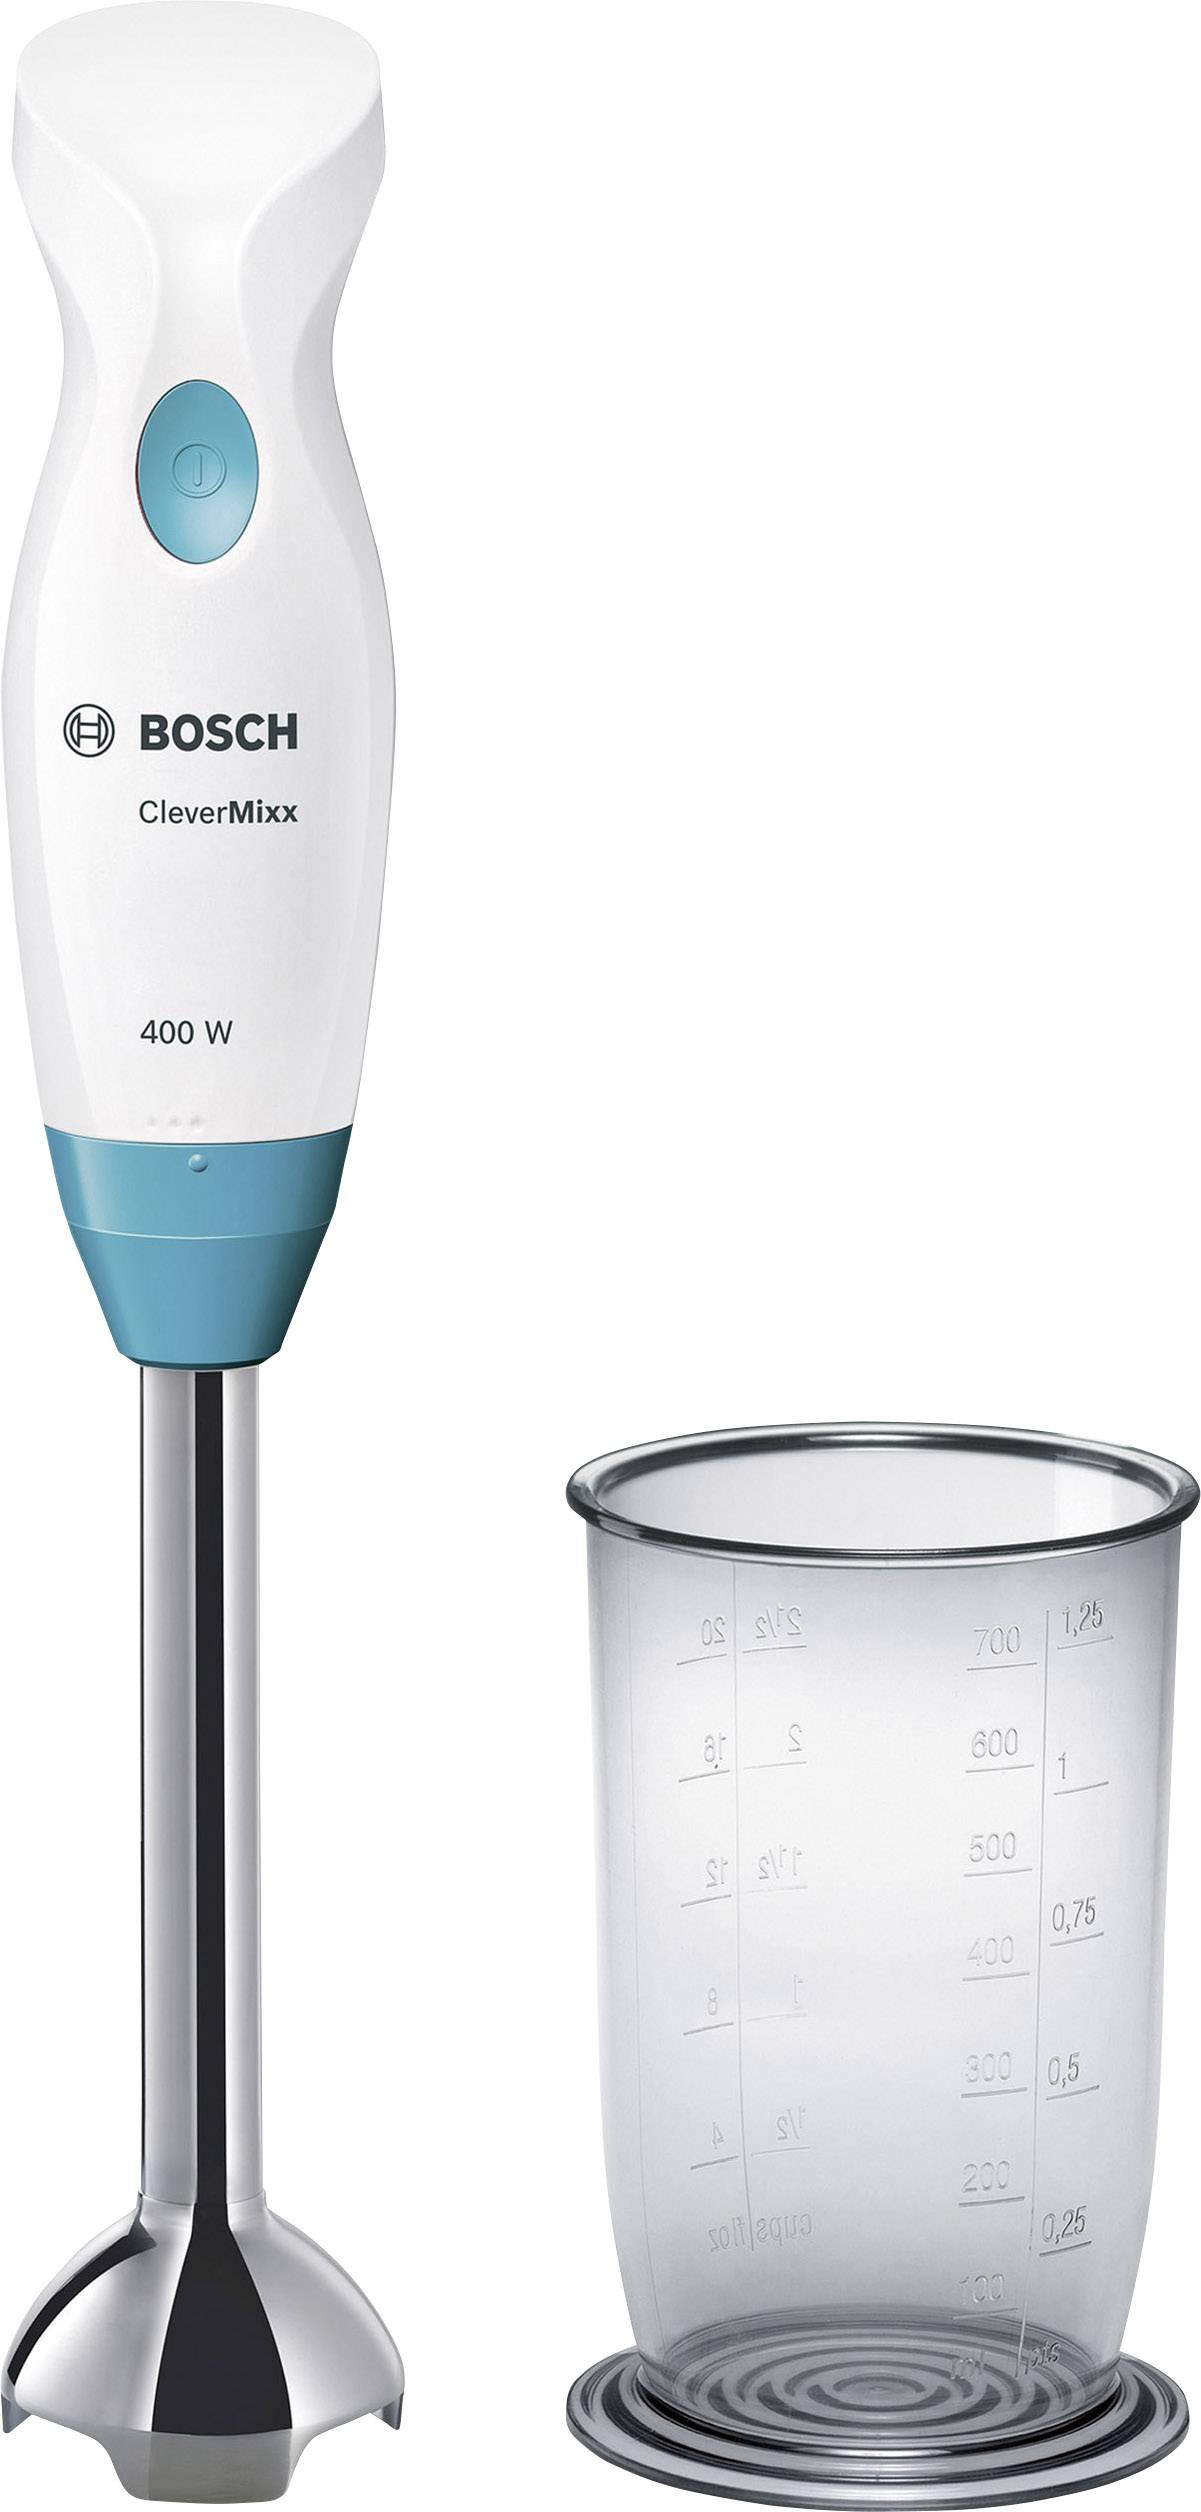 Objector Indgang Astrolabe Bosch Haushalt MSM2410DW Hand-held blender 400 W with mixing jar White,  Light blue | Conrad.com